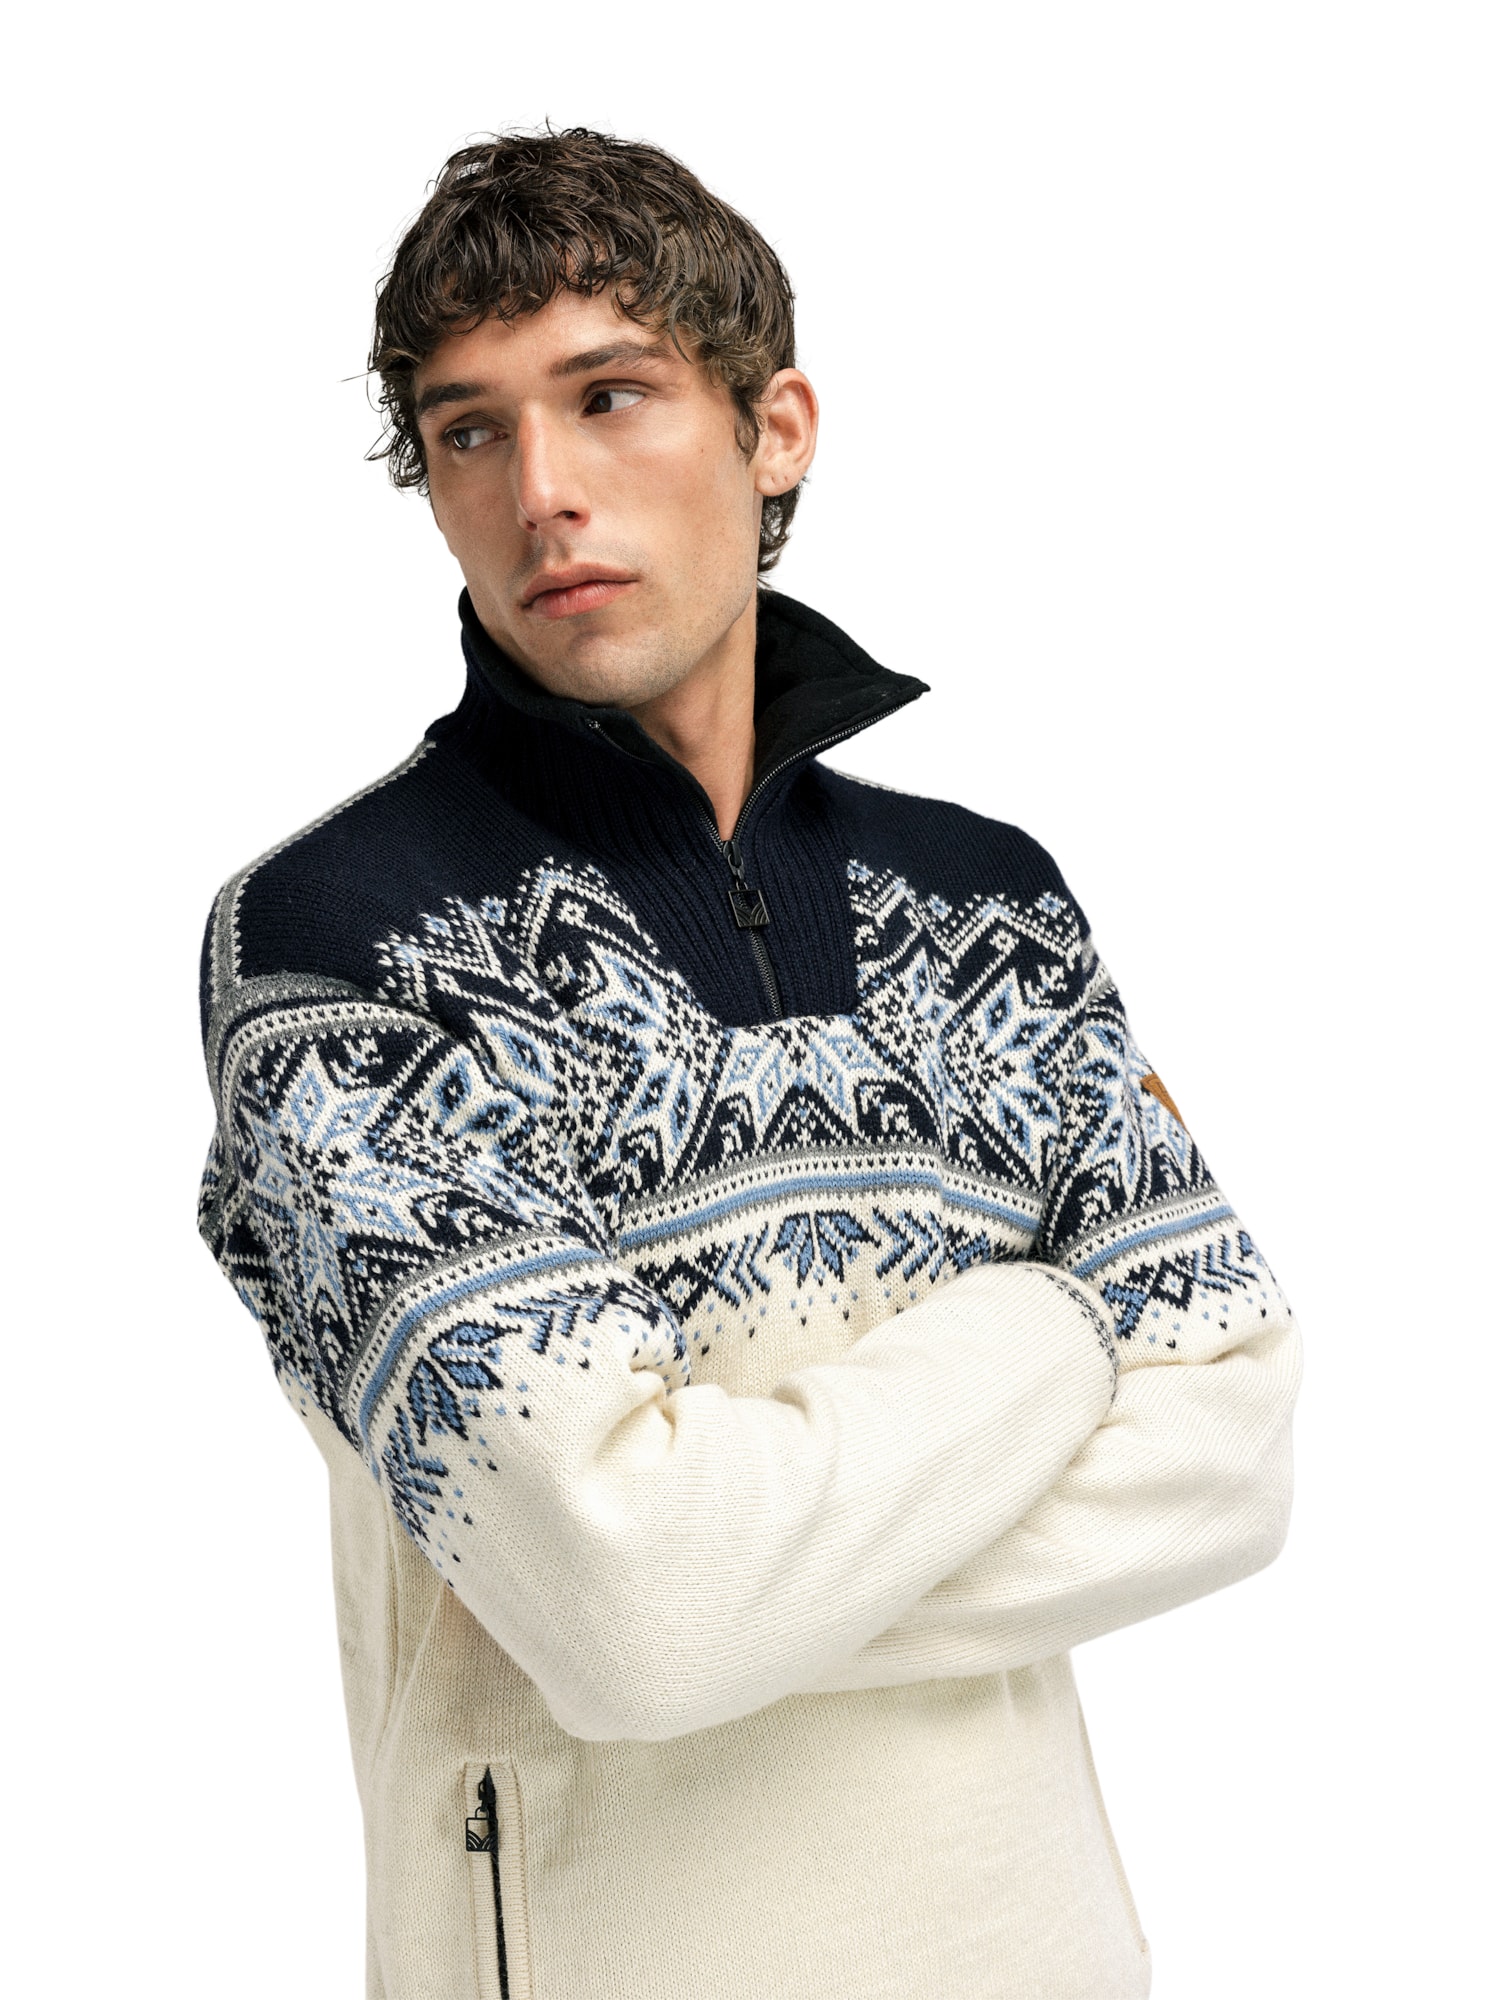 of of Men Norway Dale Dale - - Norway Weatherproof Offwhite - - Vail Sweater